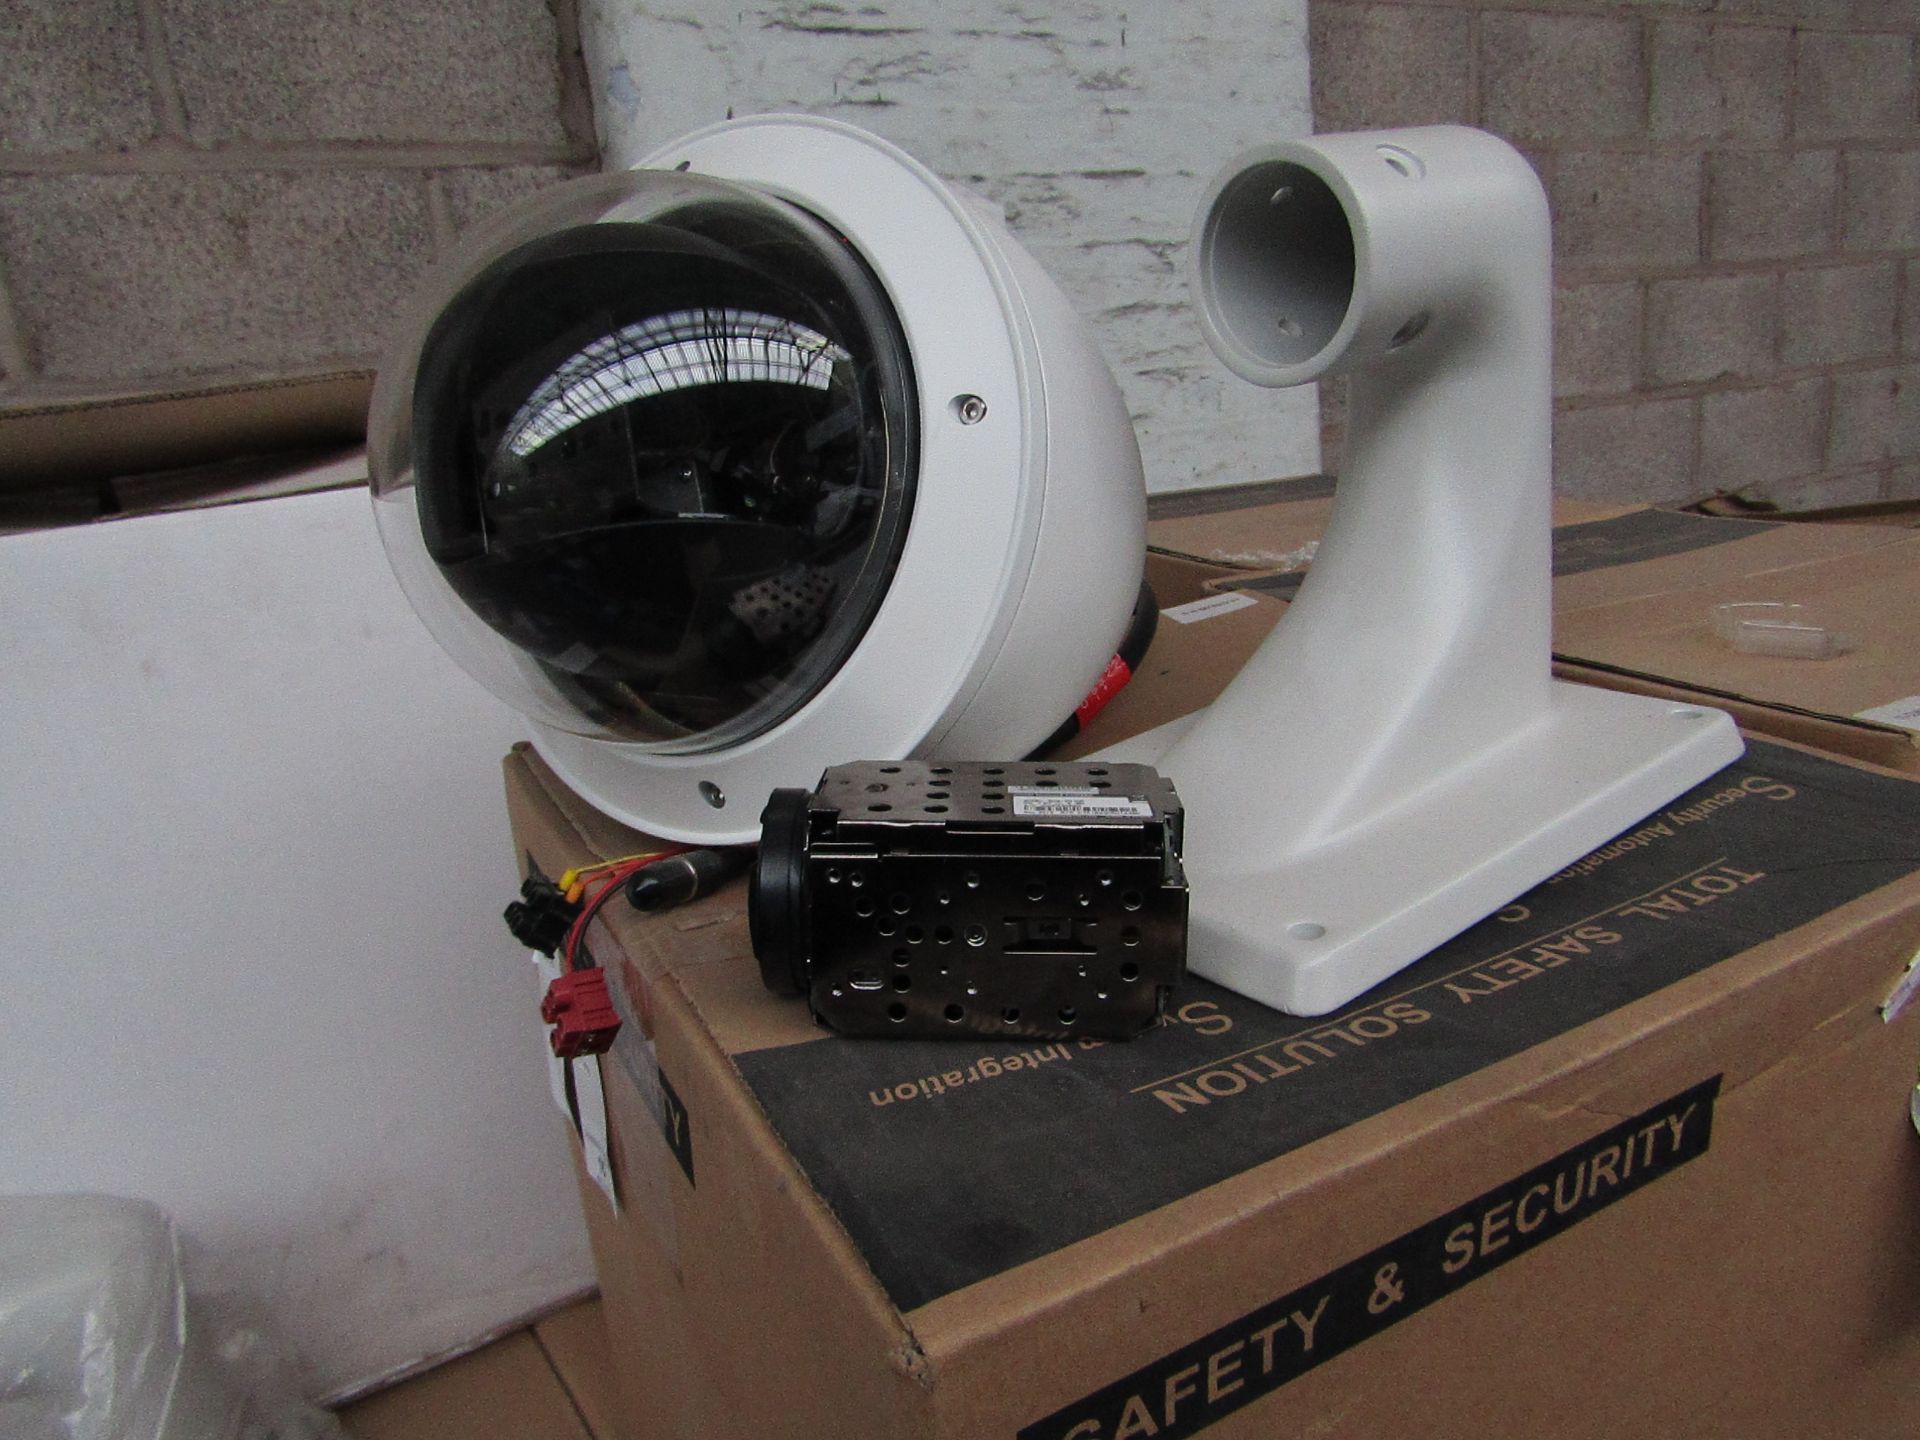 Cop Security full PTZ camera set with spare wall bracket, vendor suggests tested working and